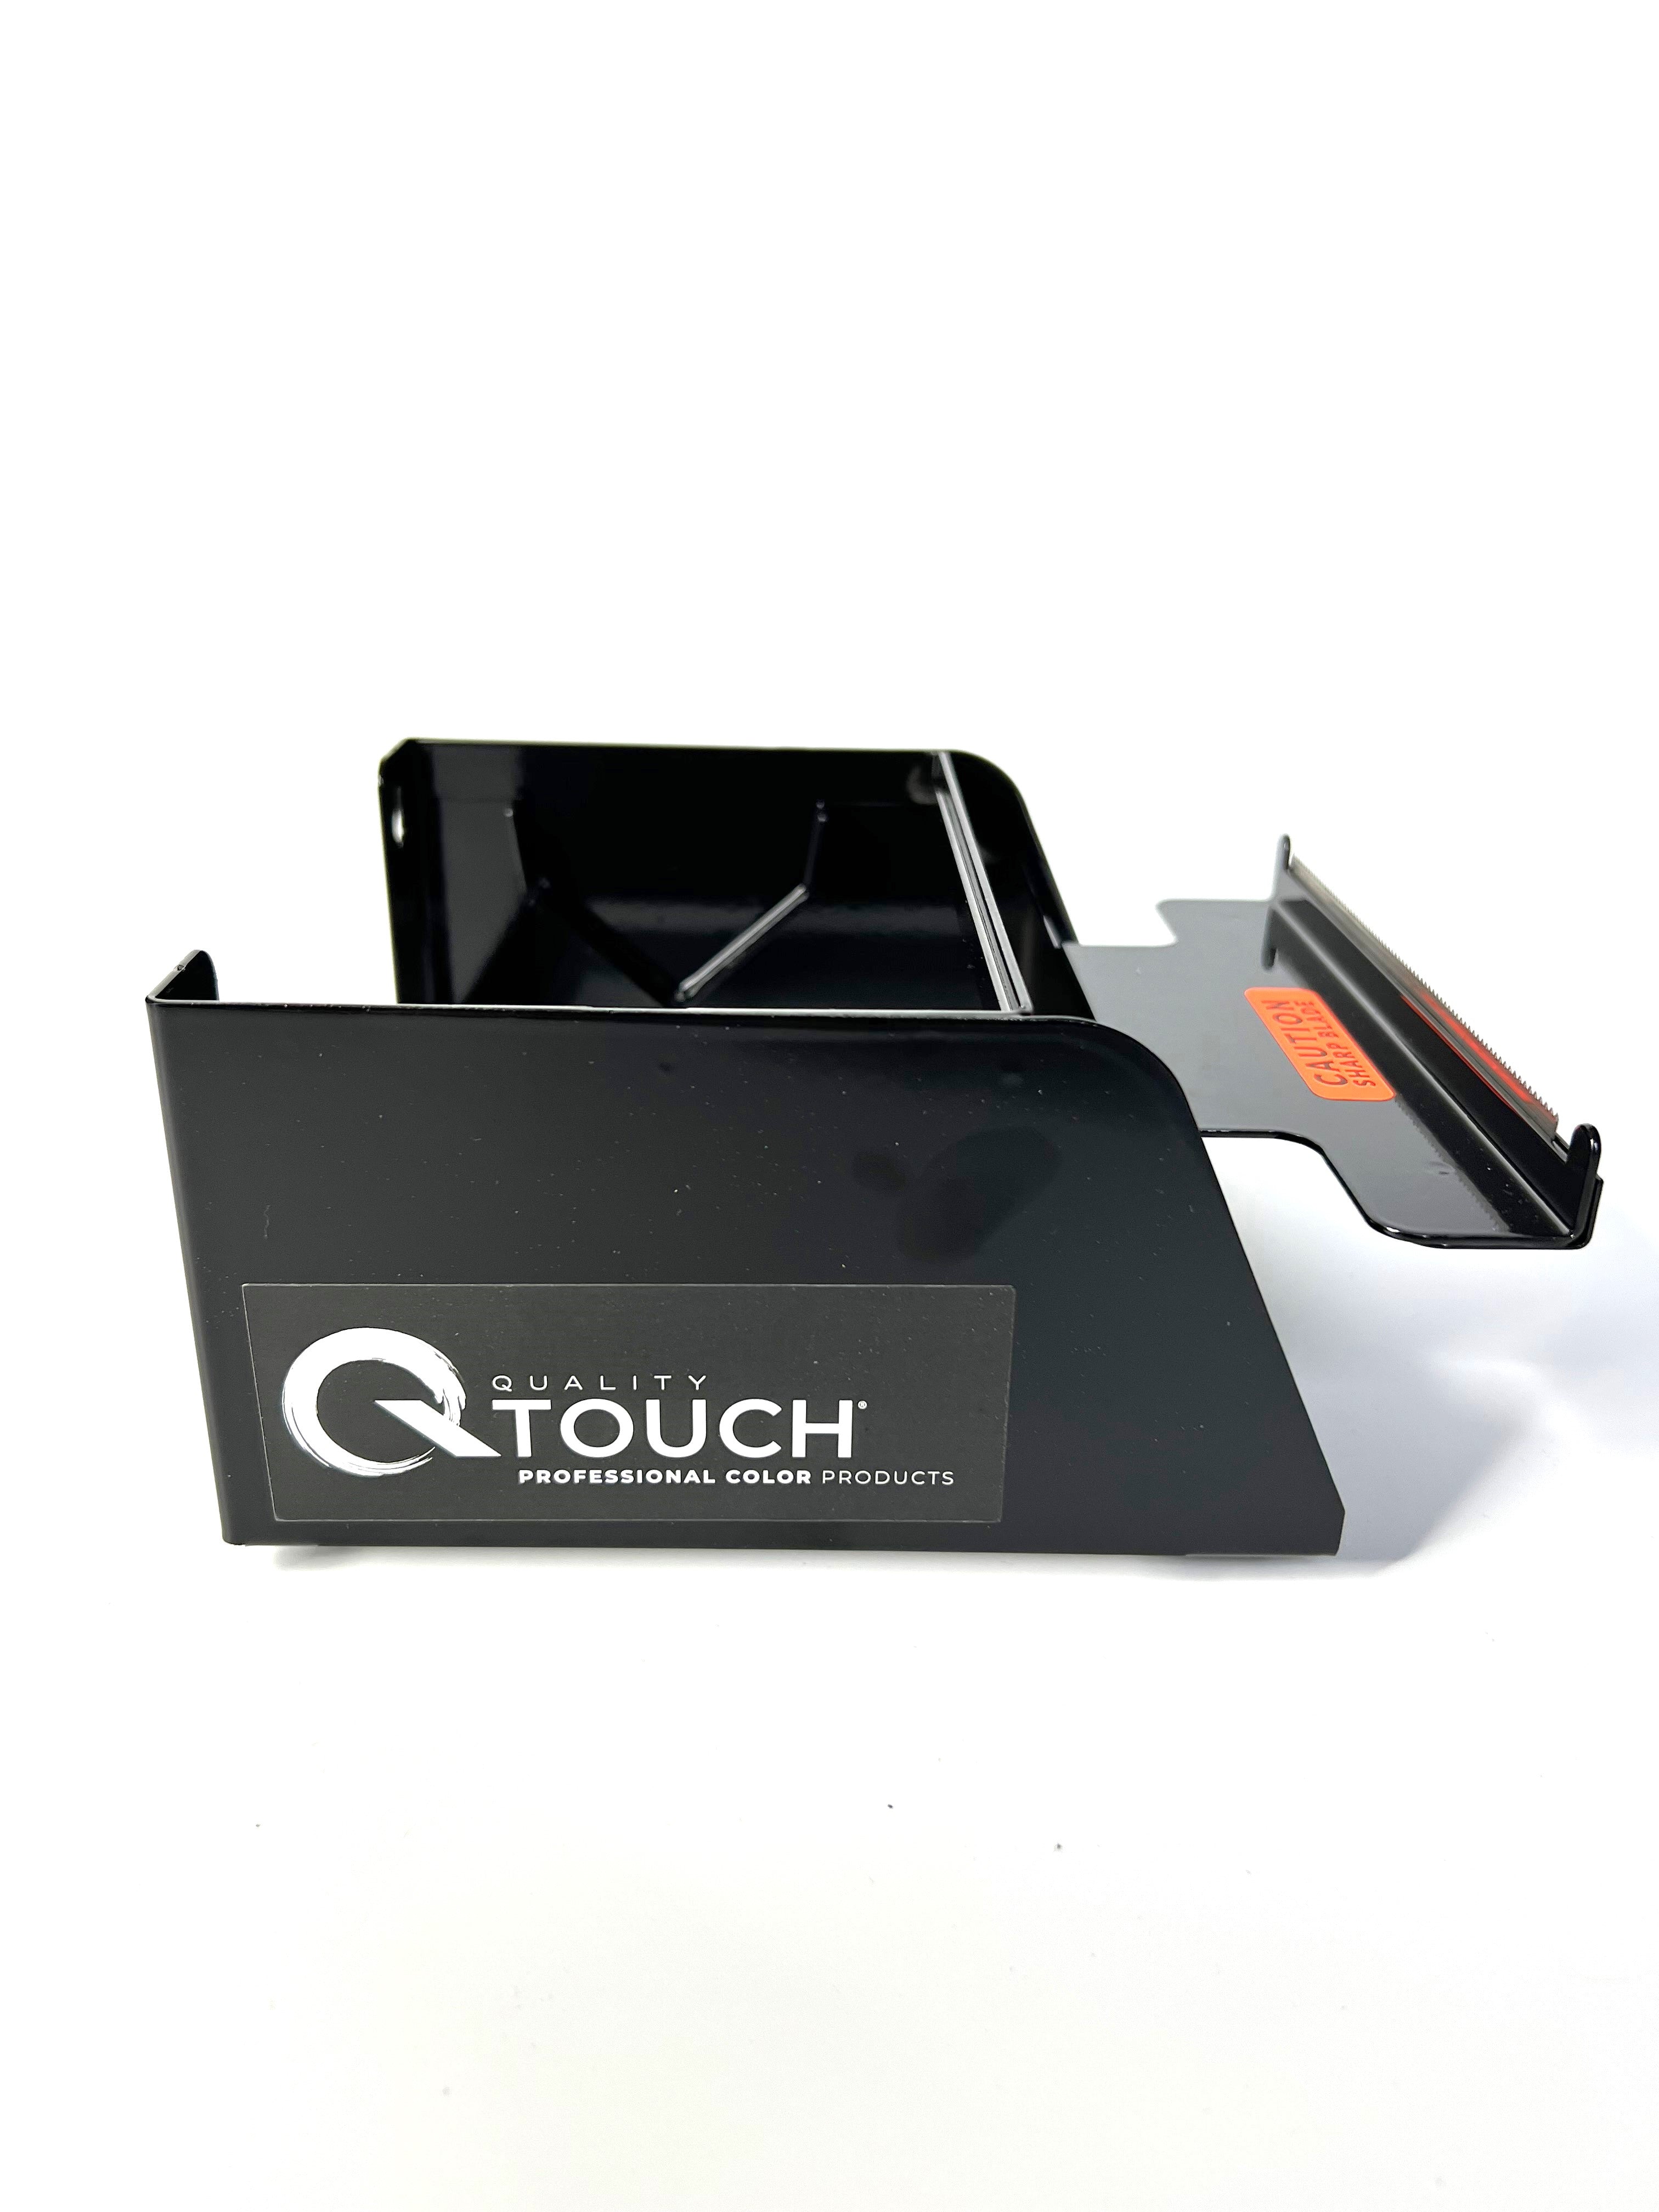 #1 Foil Cutting Machine for Hairstylists | Quality Touch Dispenser 